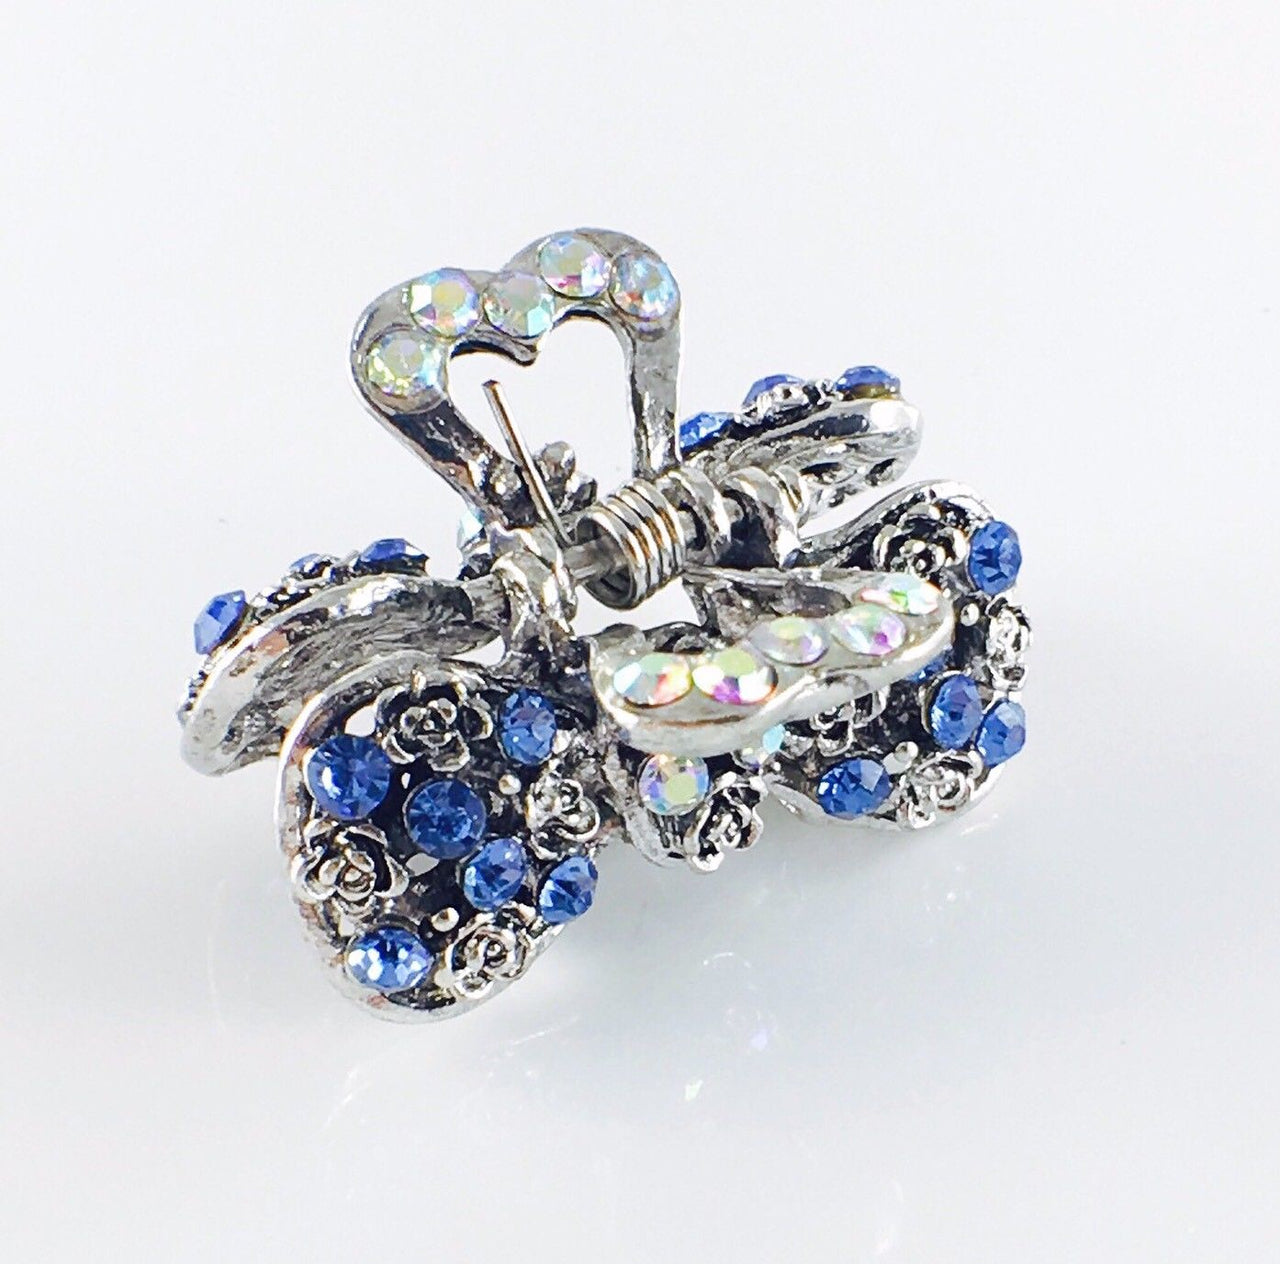 Roses Bow Knot Hair Claw Jaw Clip use Rhinestone Crystal Silver base Blue Sapphire, Hair Claw - MOGHANT